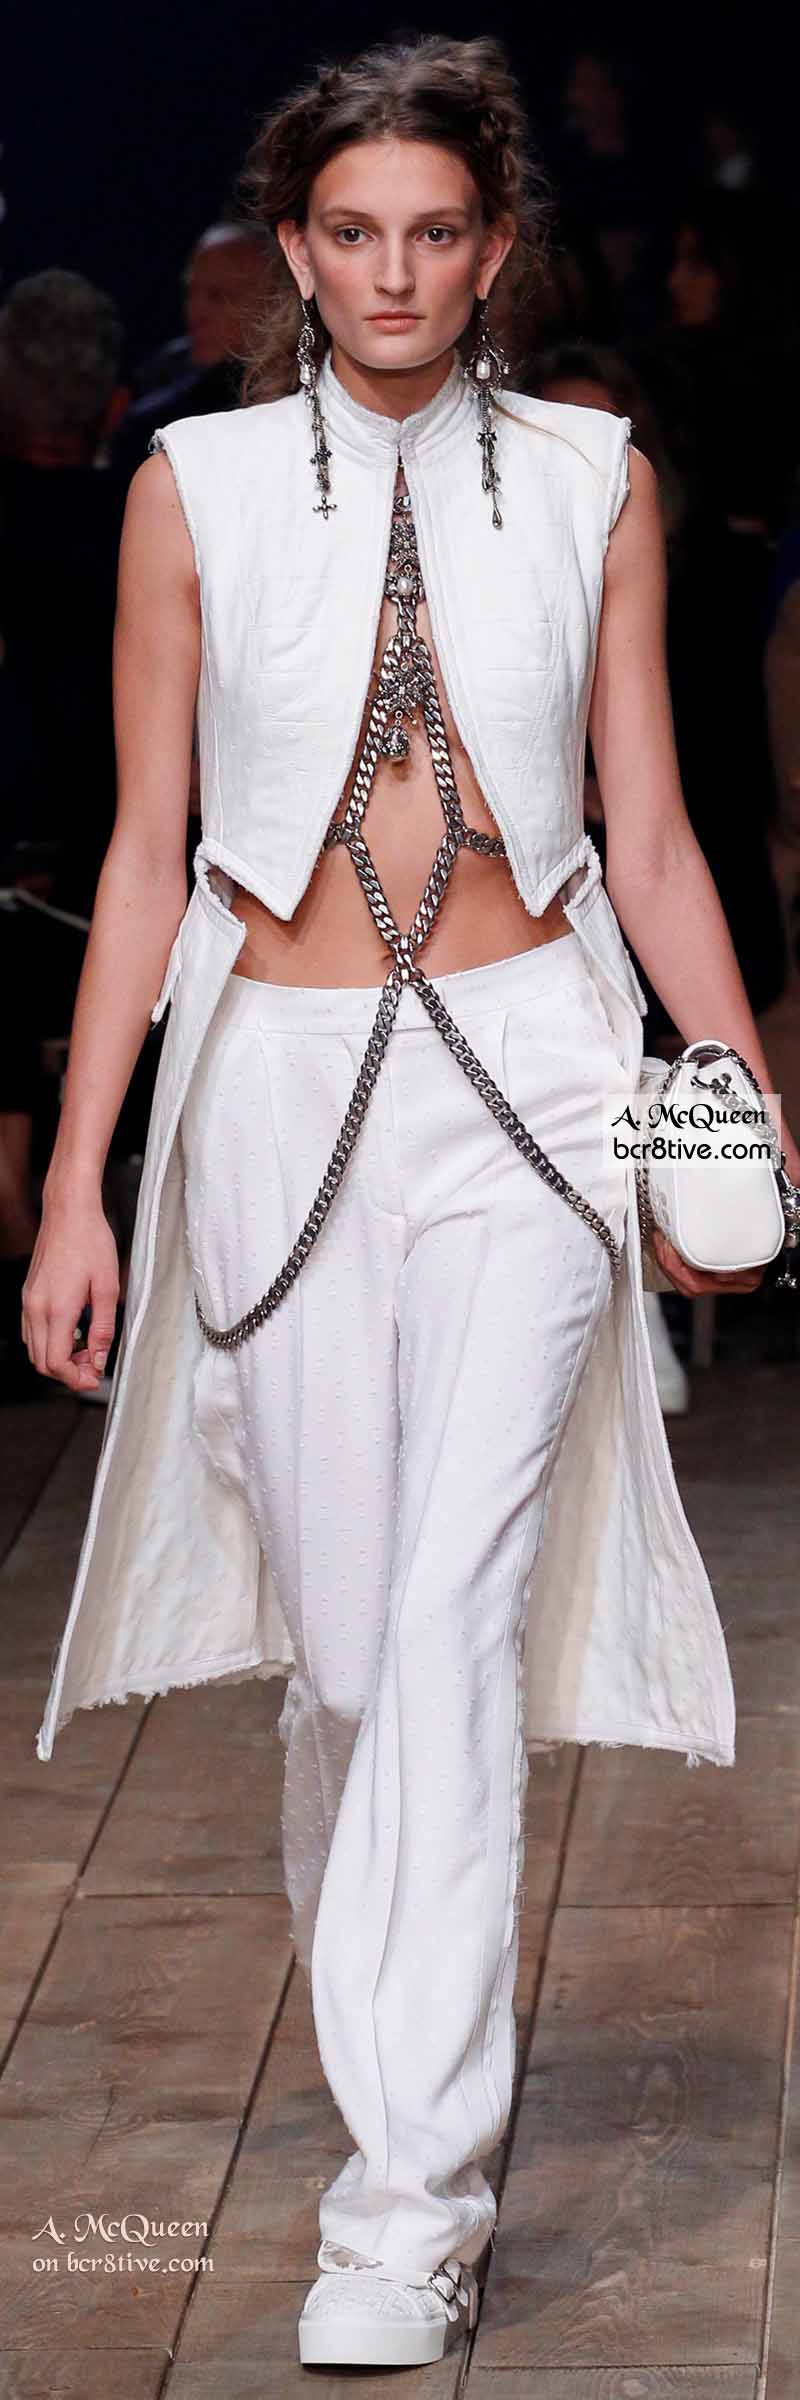 Suit with Body Chains - The Best of Alexander McQueen 2016